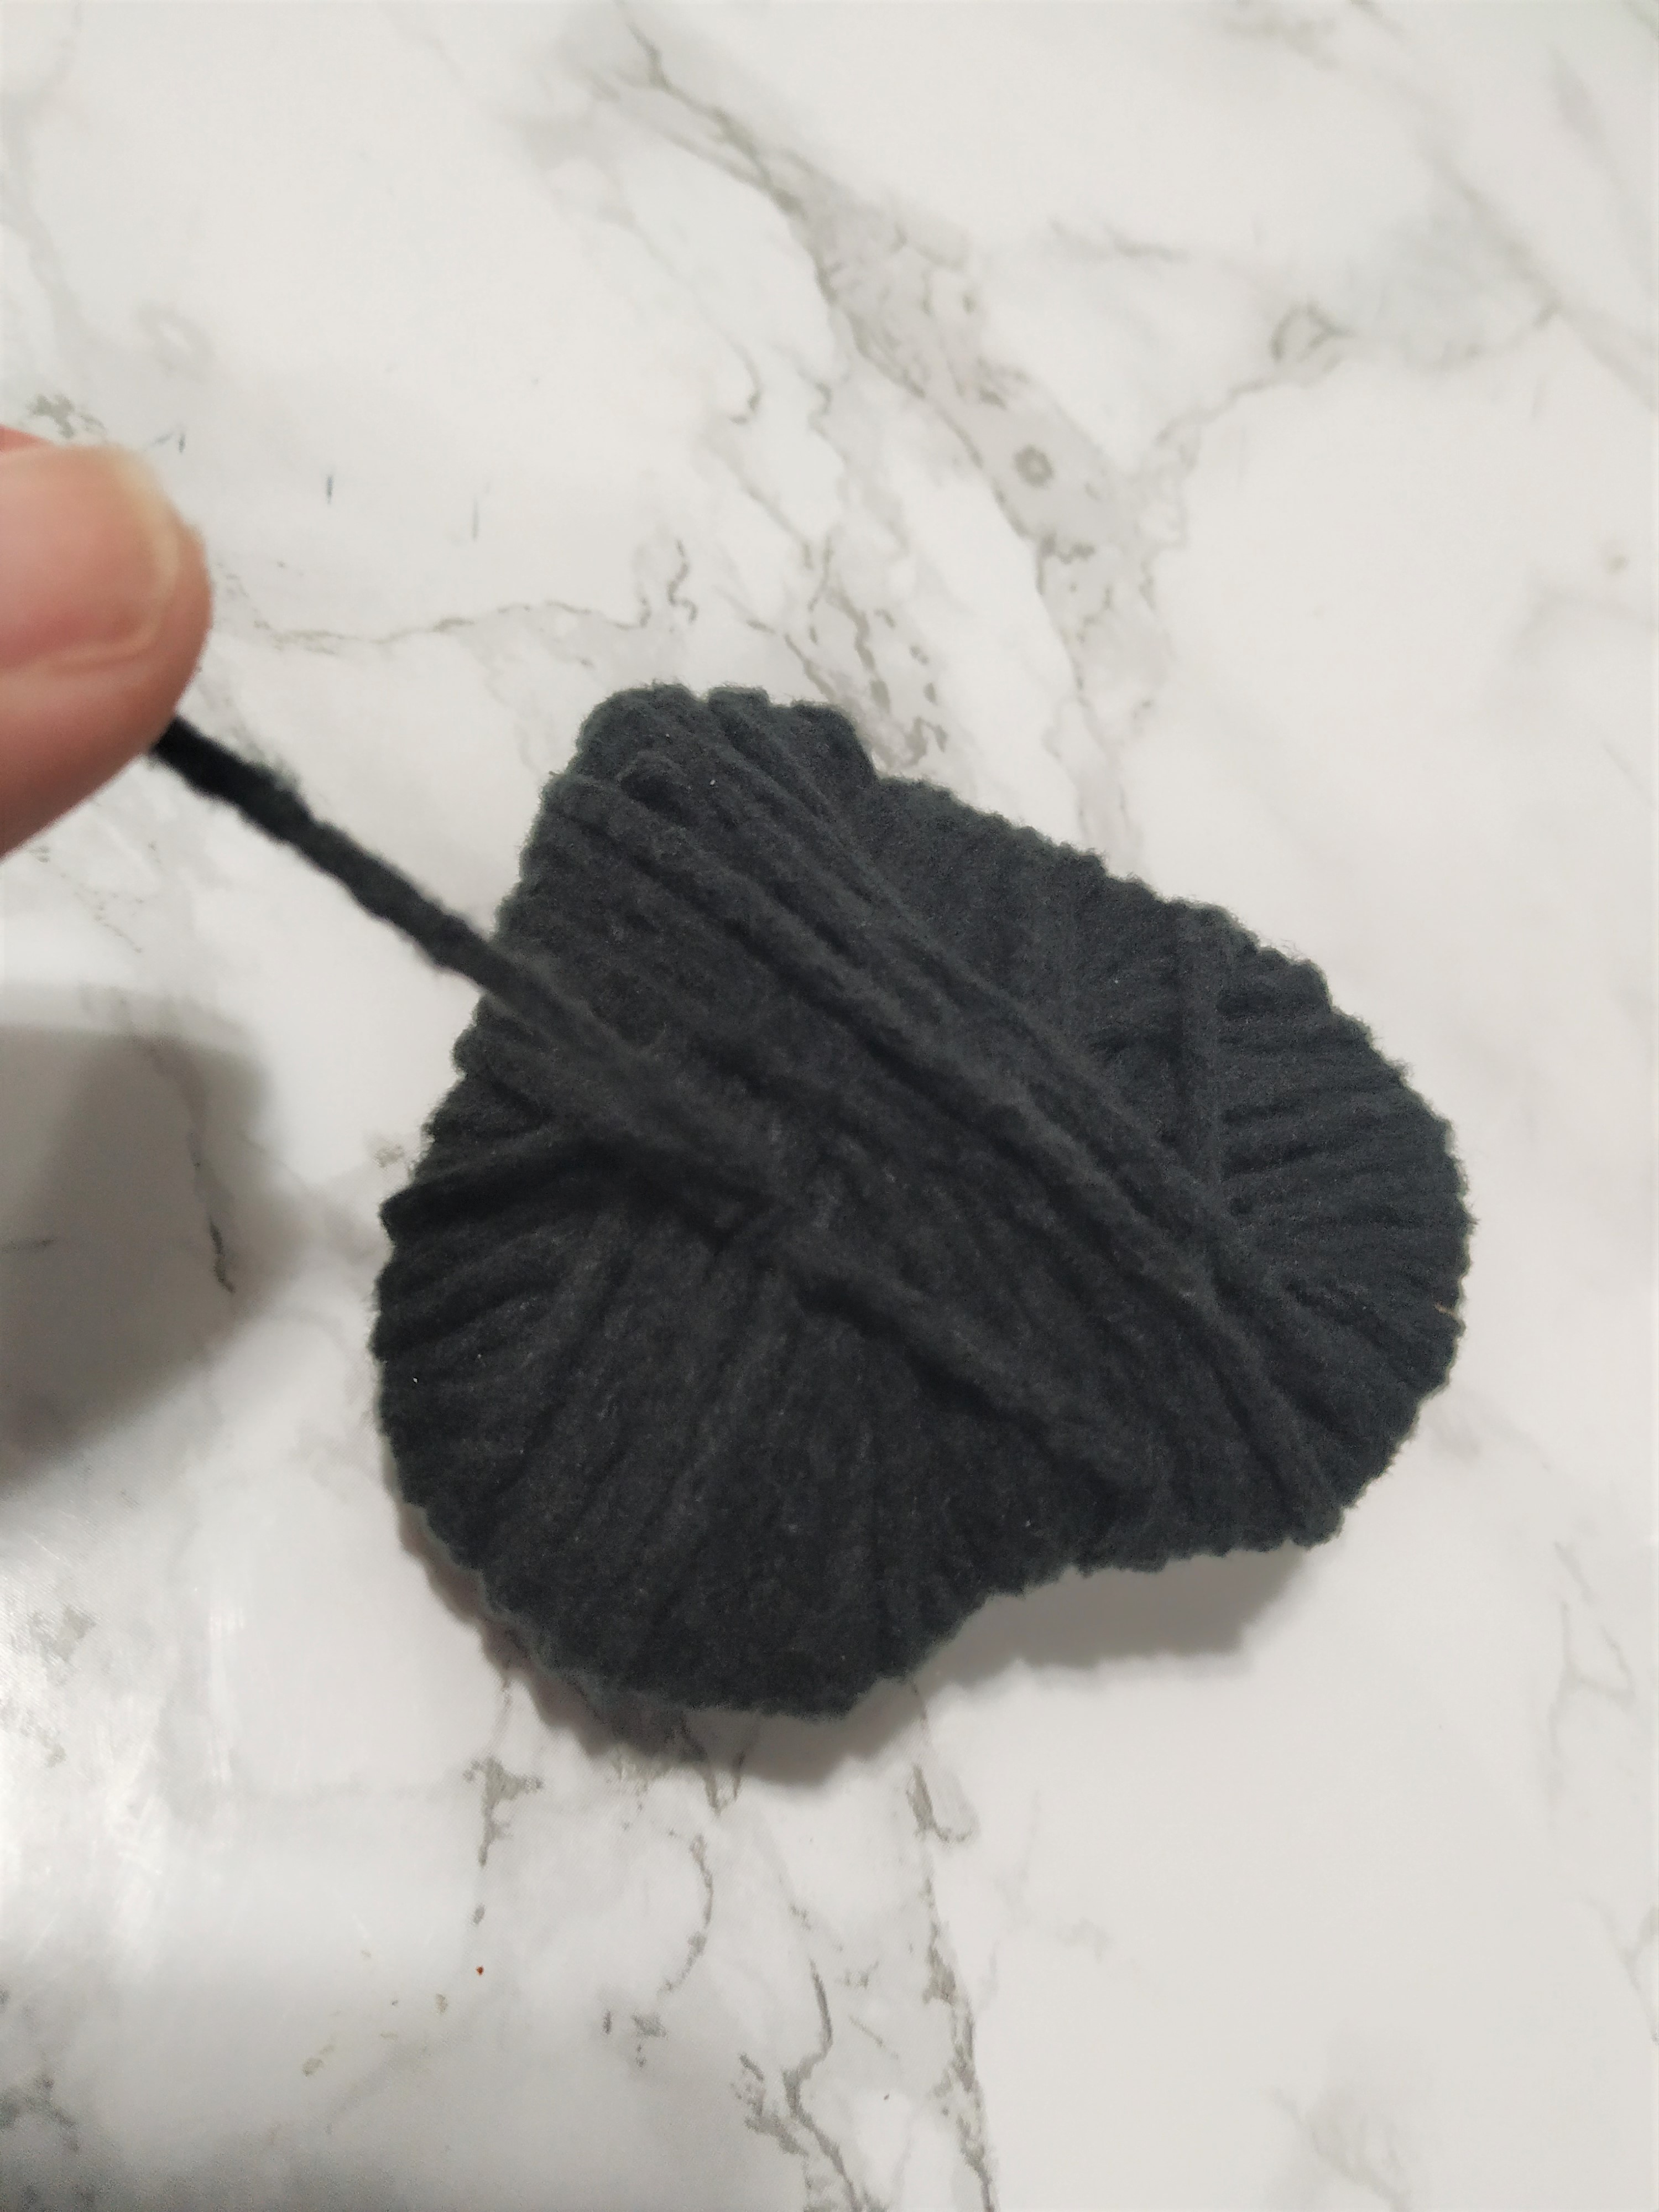 Holding an excess piece of yarn.